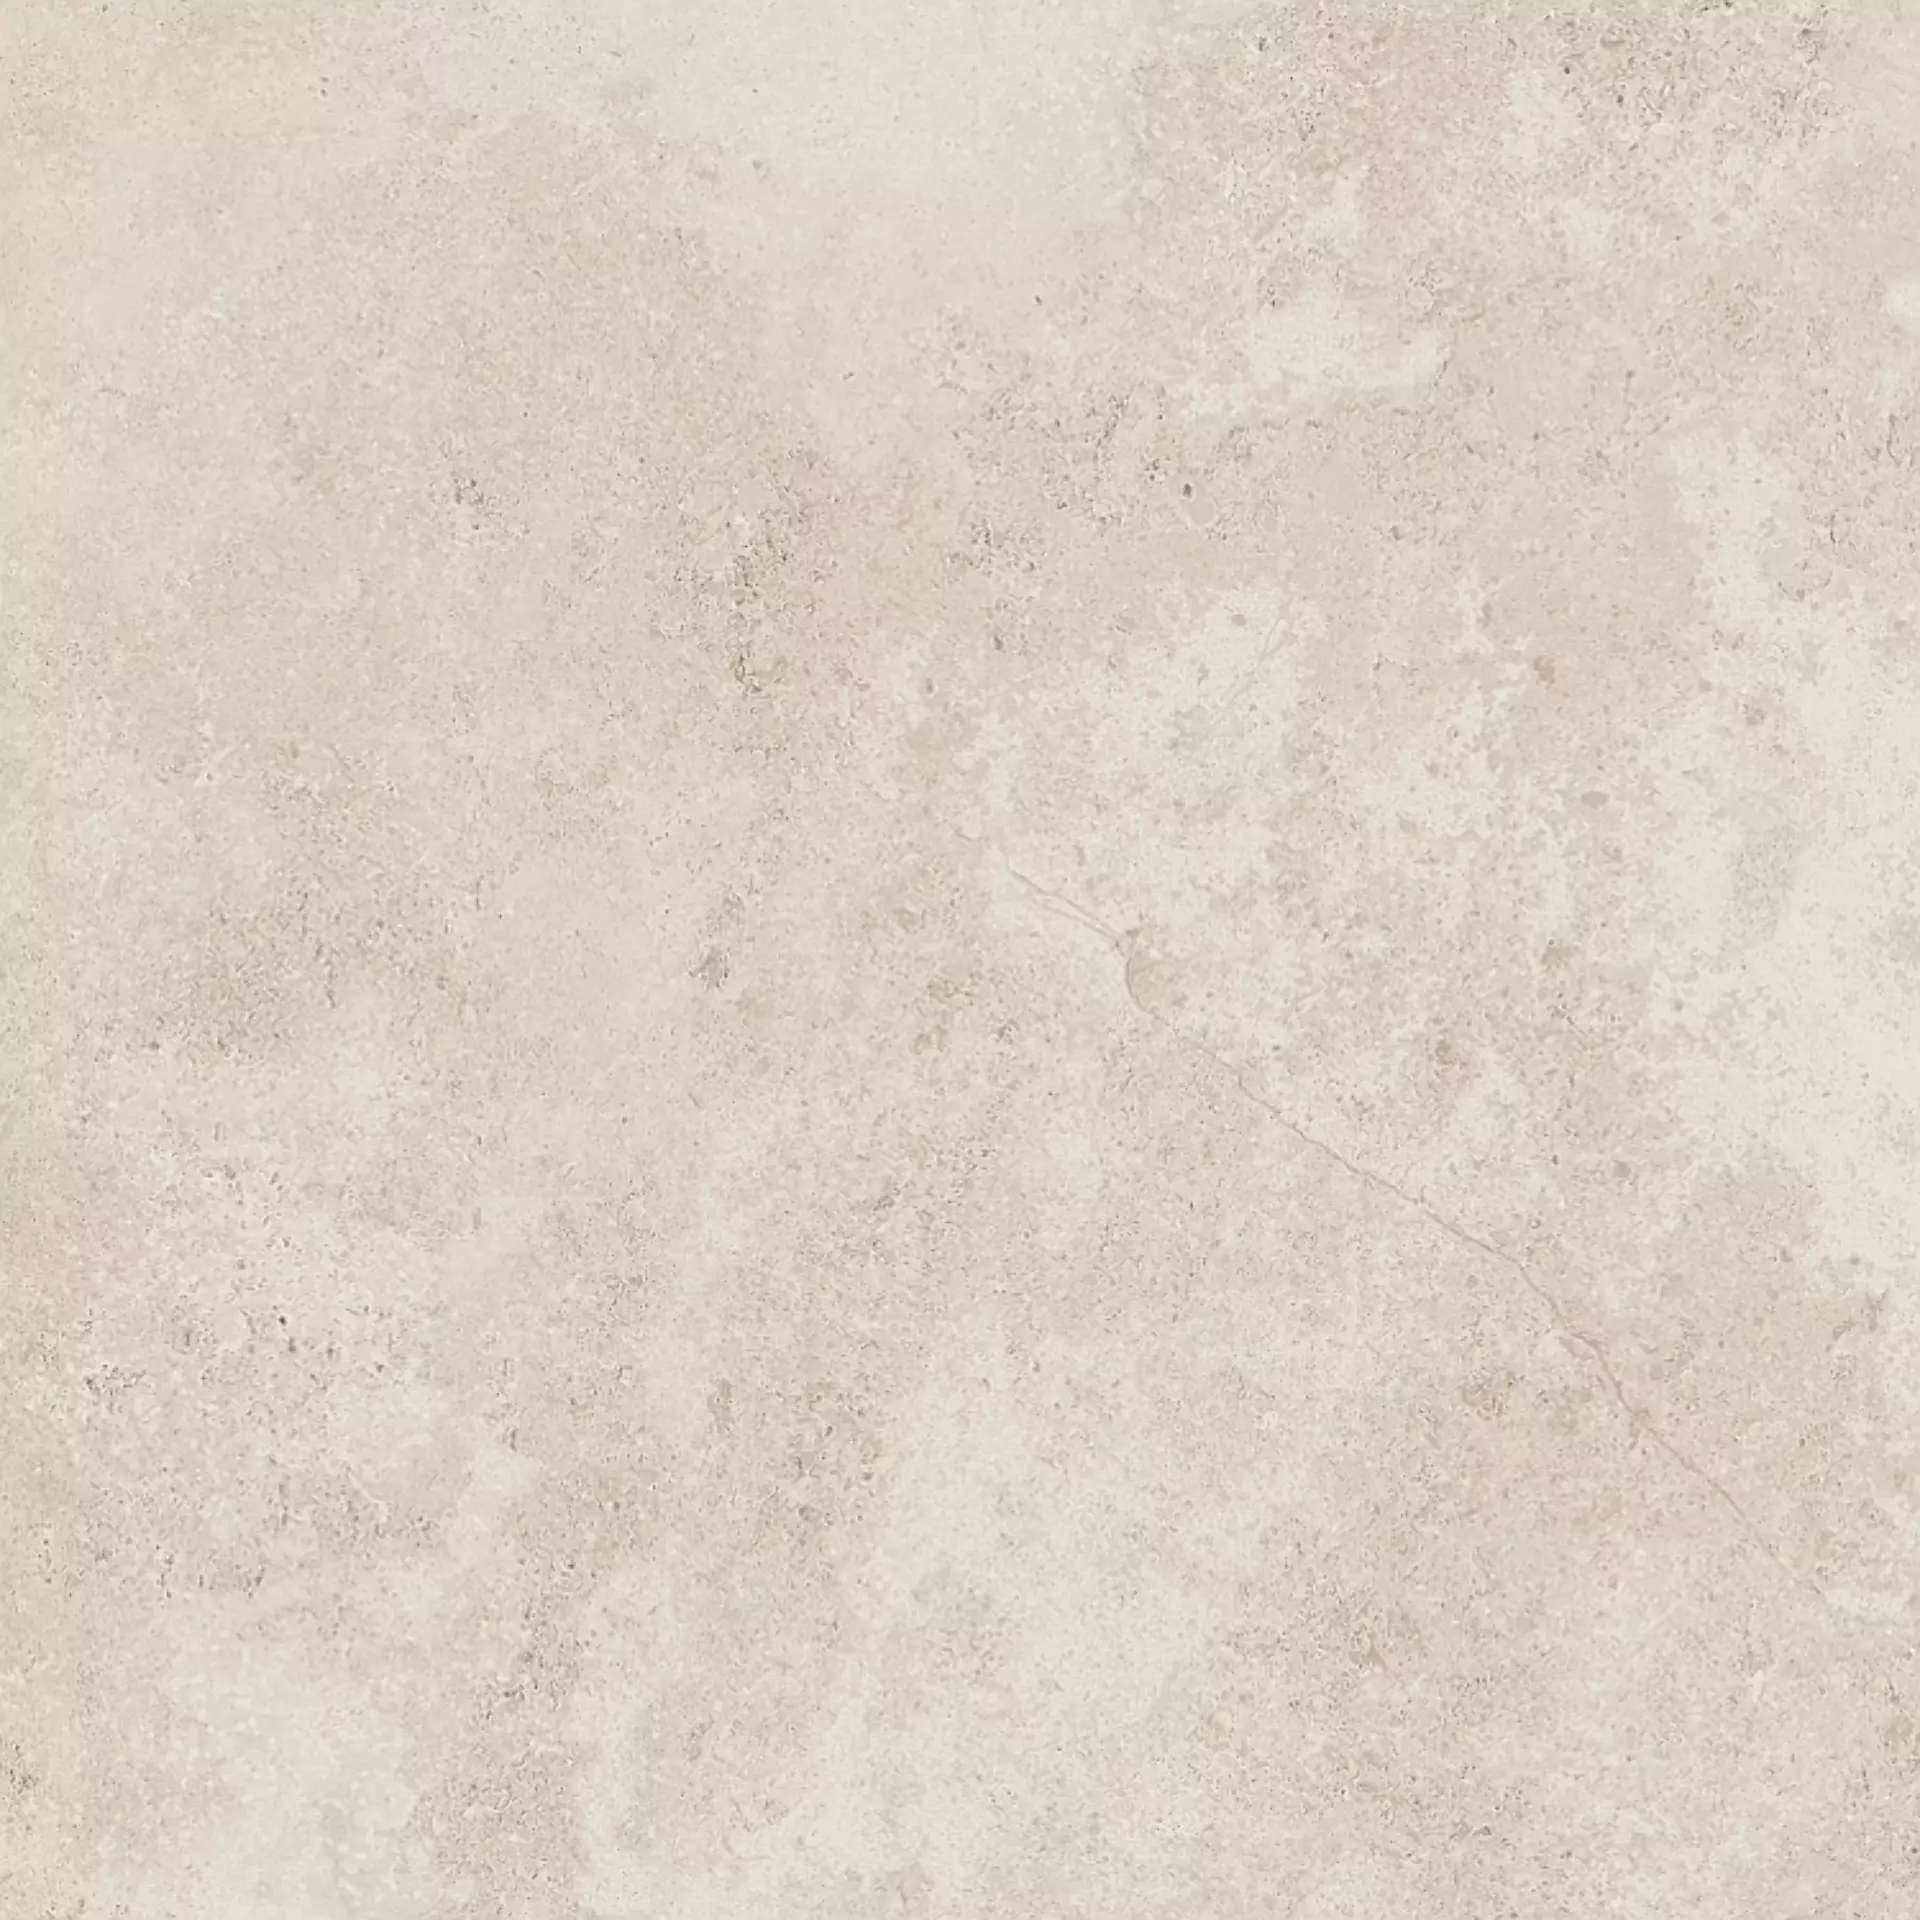 Supergres French Mood Chalon Naturale – Matt CH60 60x60cm rectified 9mm